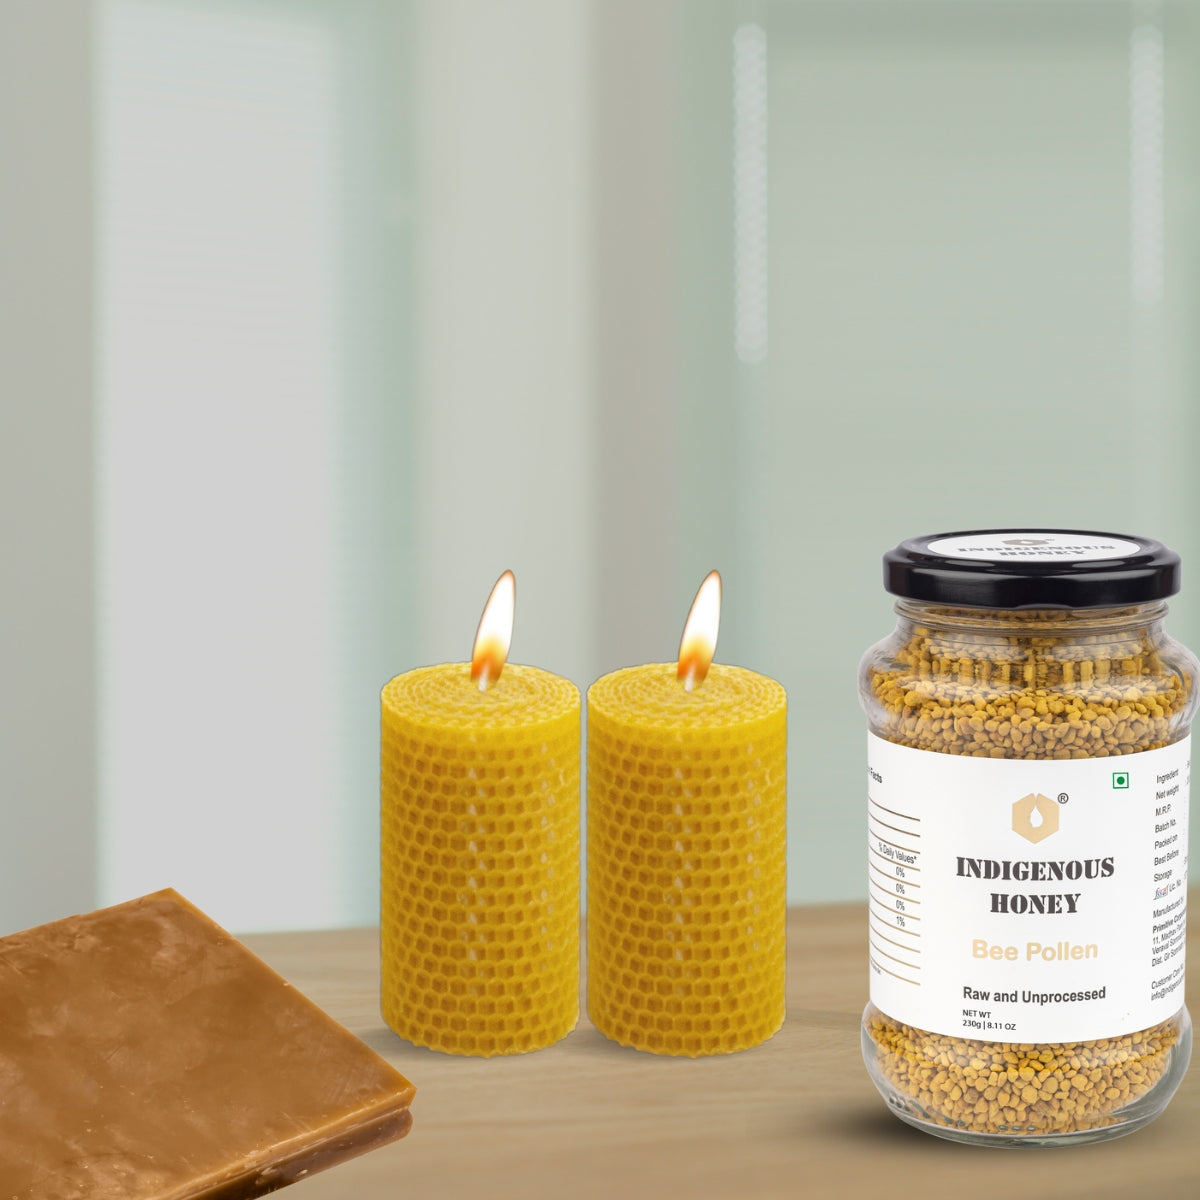 Pure beeswax Unscented candle and Natural bee pollen